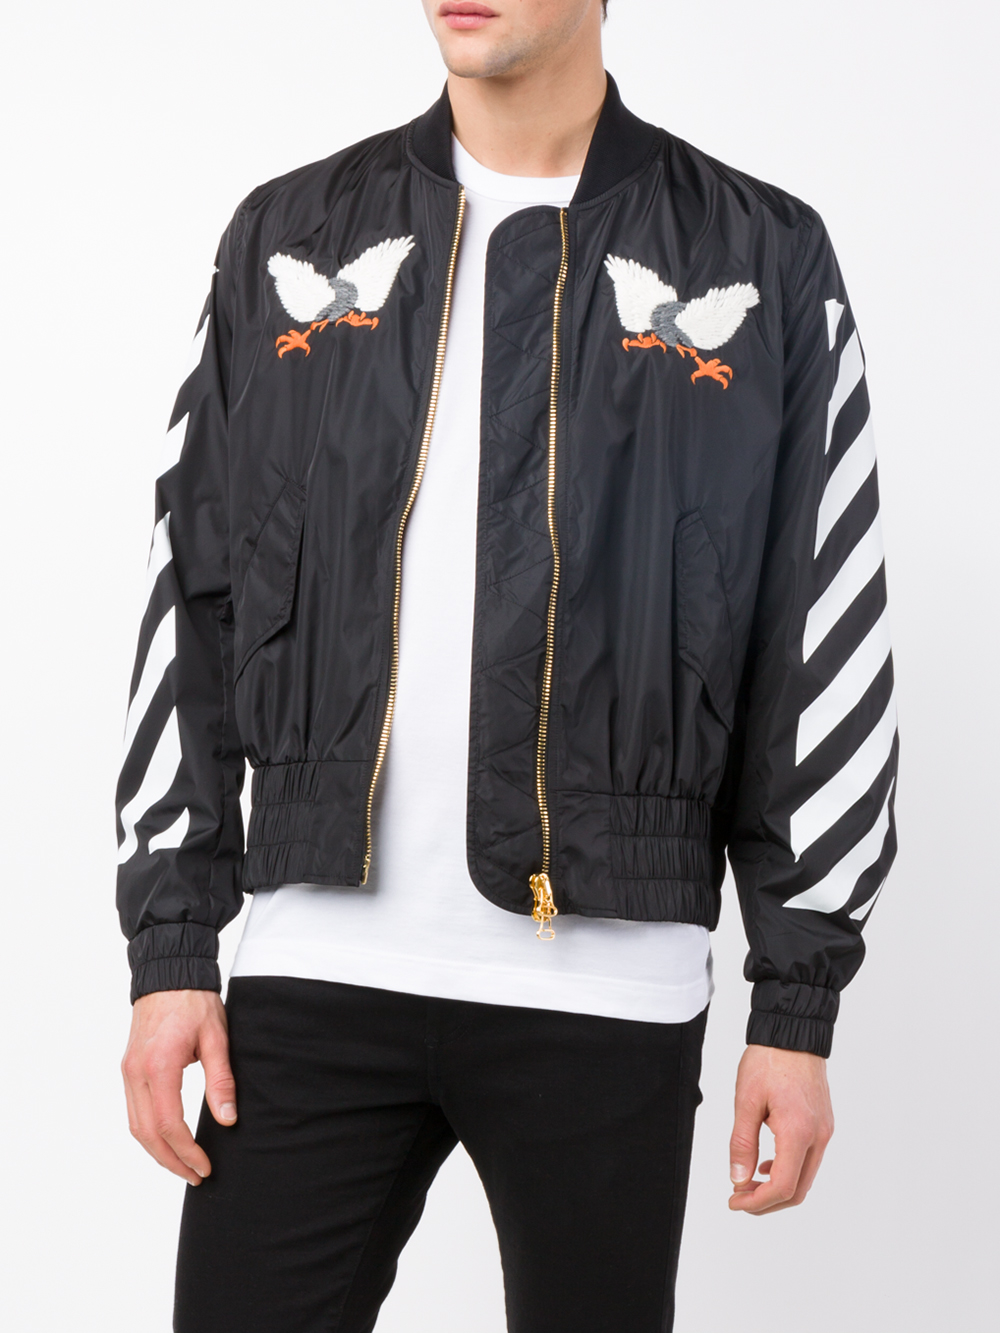 OFF-WHITE C/O VIRGIL ABLOH PRINTED QUILTED PADDED WOOL BOMBER